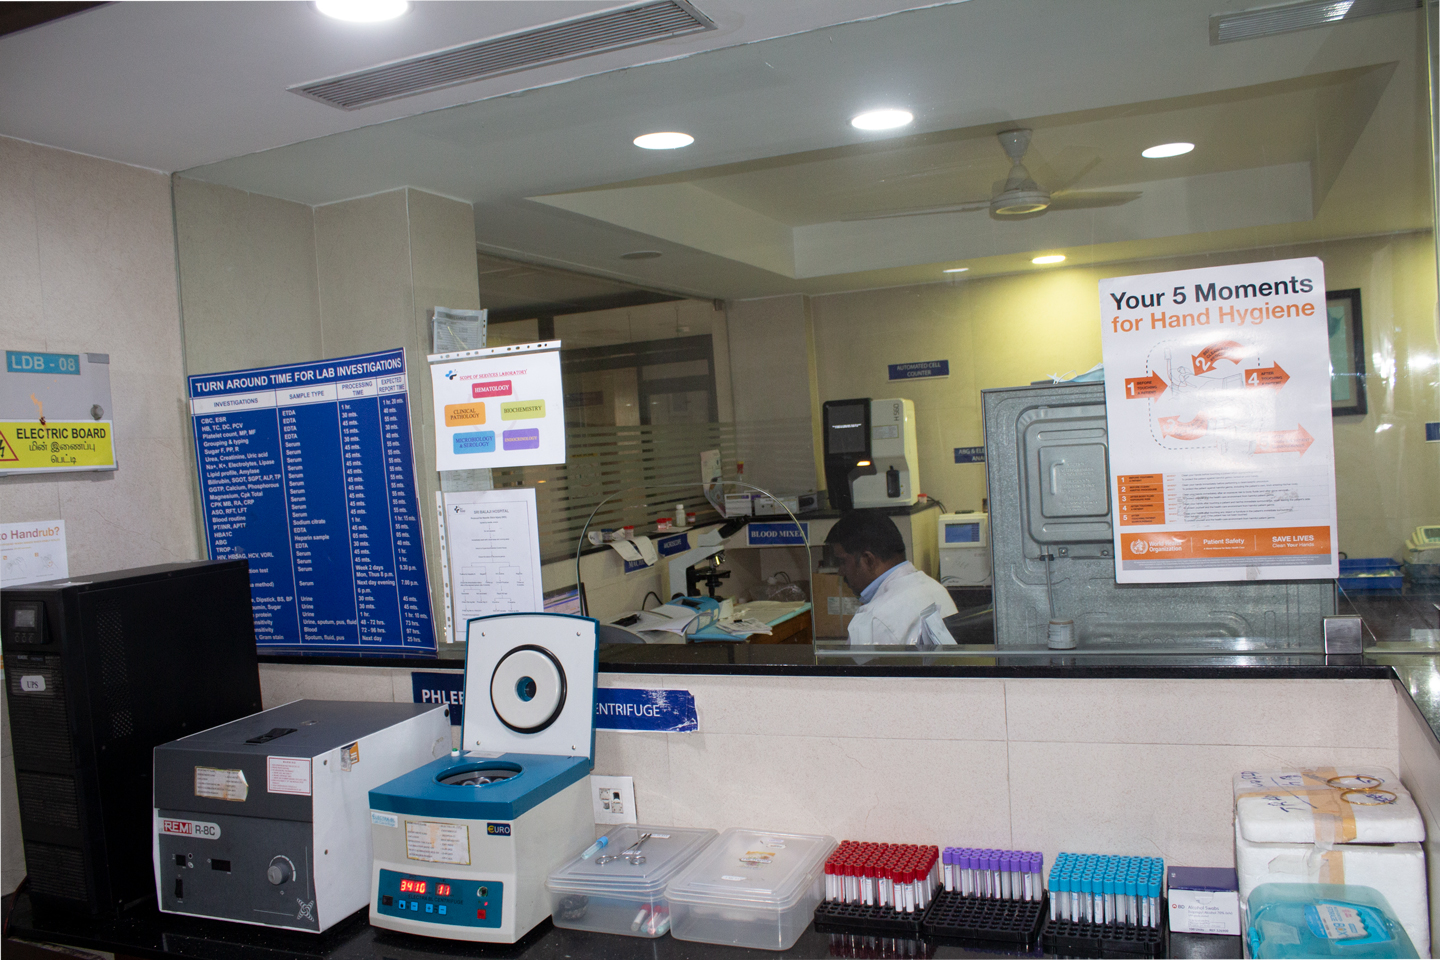 A view of the lab infrastructure at Sri Balaji Hospital, Chennai, with lab turnaround time and hygiene instructions.